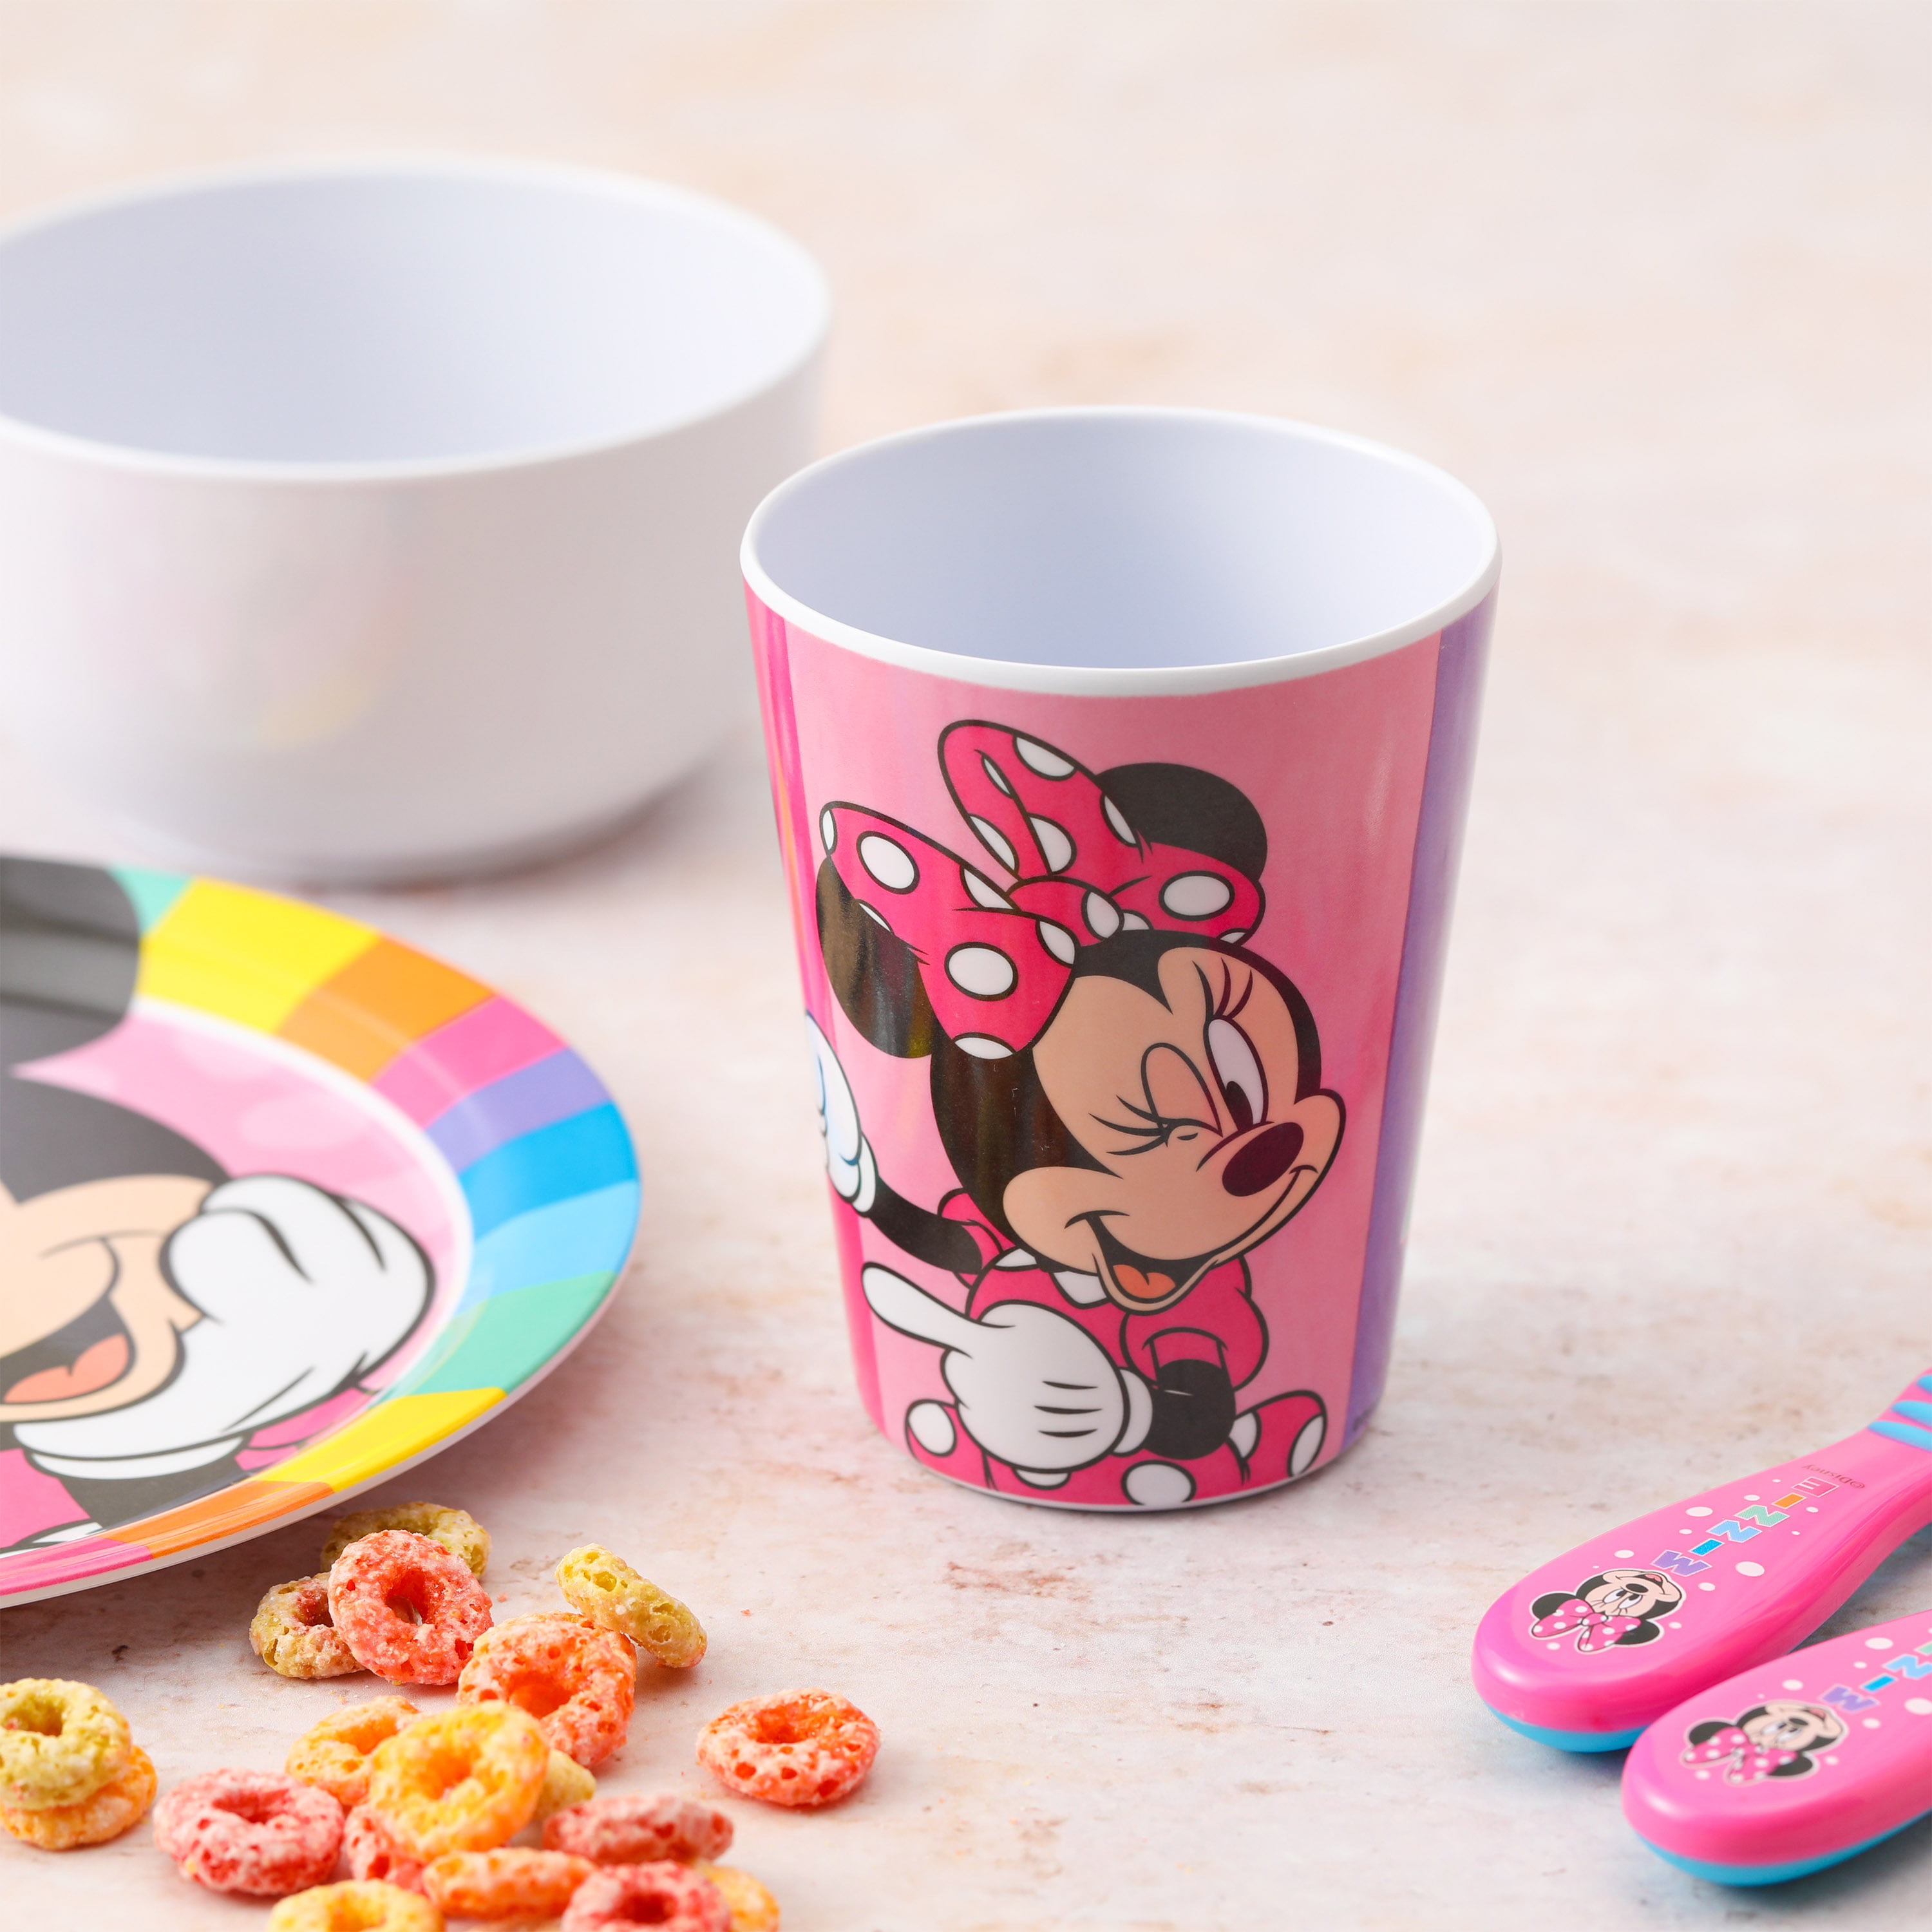 Zak Designs Disney Minnie Mouse Kids Dinnerware Set Includes Plate Bowl and  Tumbler Made of BPA-Free Durable Melamine Material and Perfect for Kids 3  Piece Set - Walmart.com